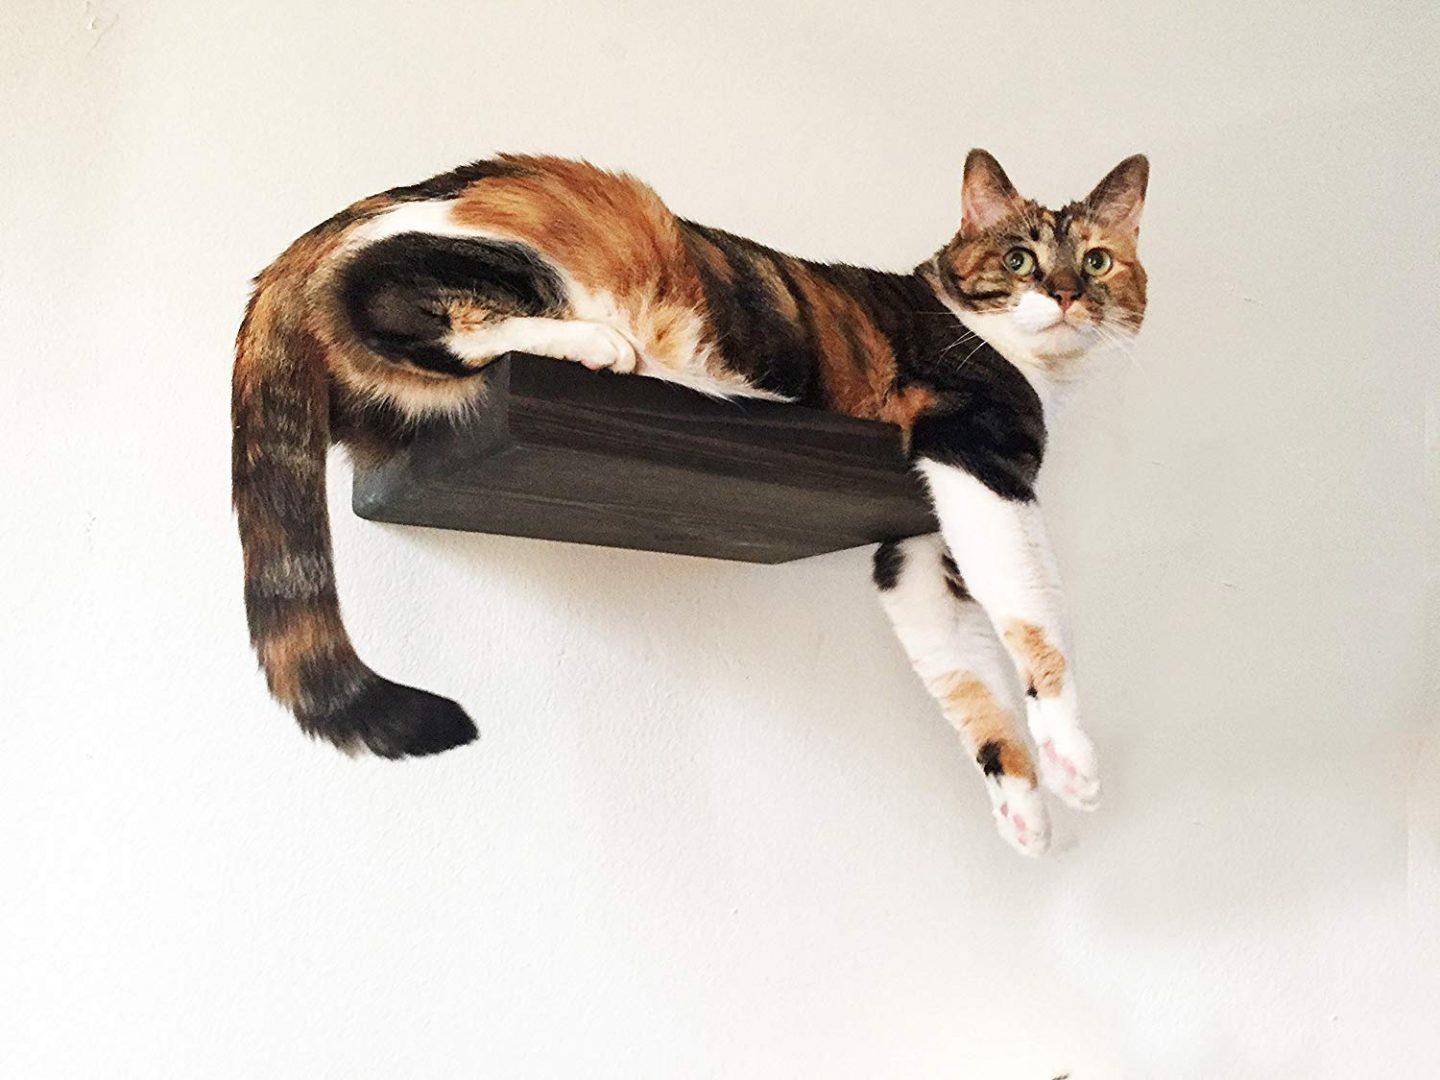 A 12" cat shelf suitable for making cat stairs on your wall up to higher cat shelves or a cat wall raceway